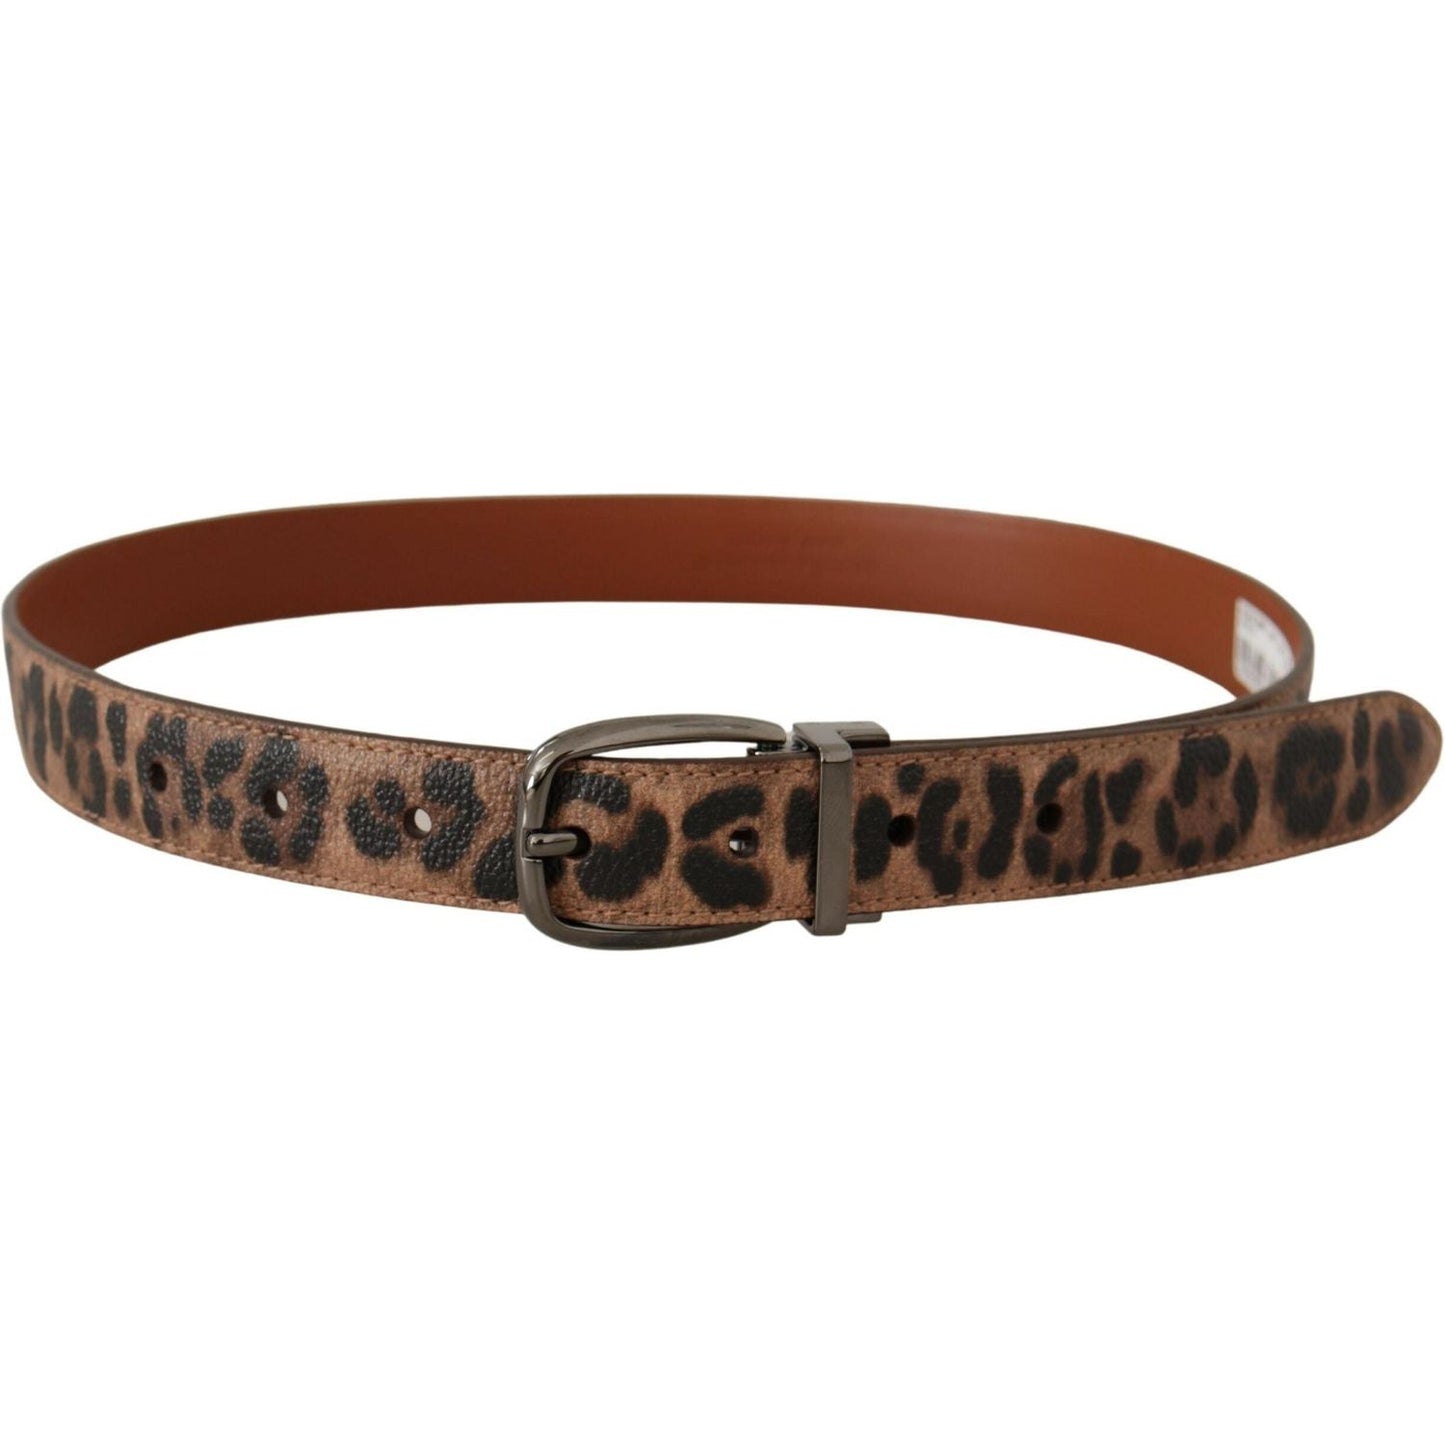 Dolce & Gabbana Elegant Engraved Leather Belt - Timeless Style brown-leopard-embossed-leather-buckle-belt IMG_8806-scaled-a9f08d4a-162.jpg